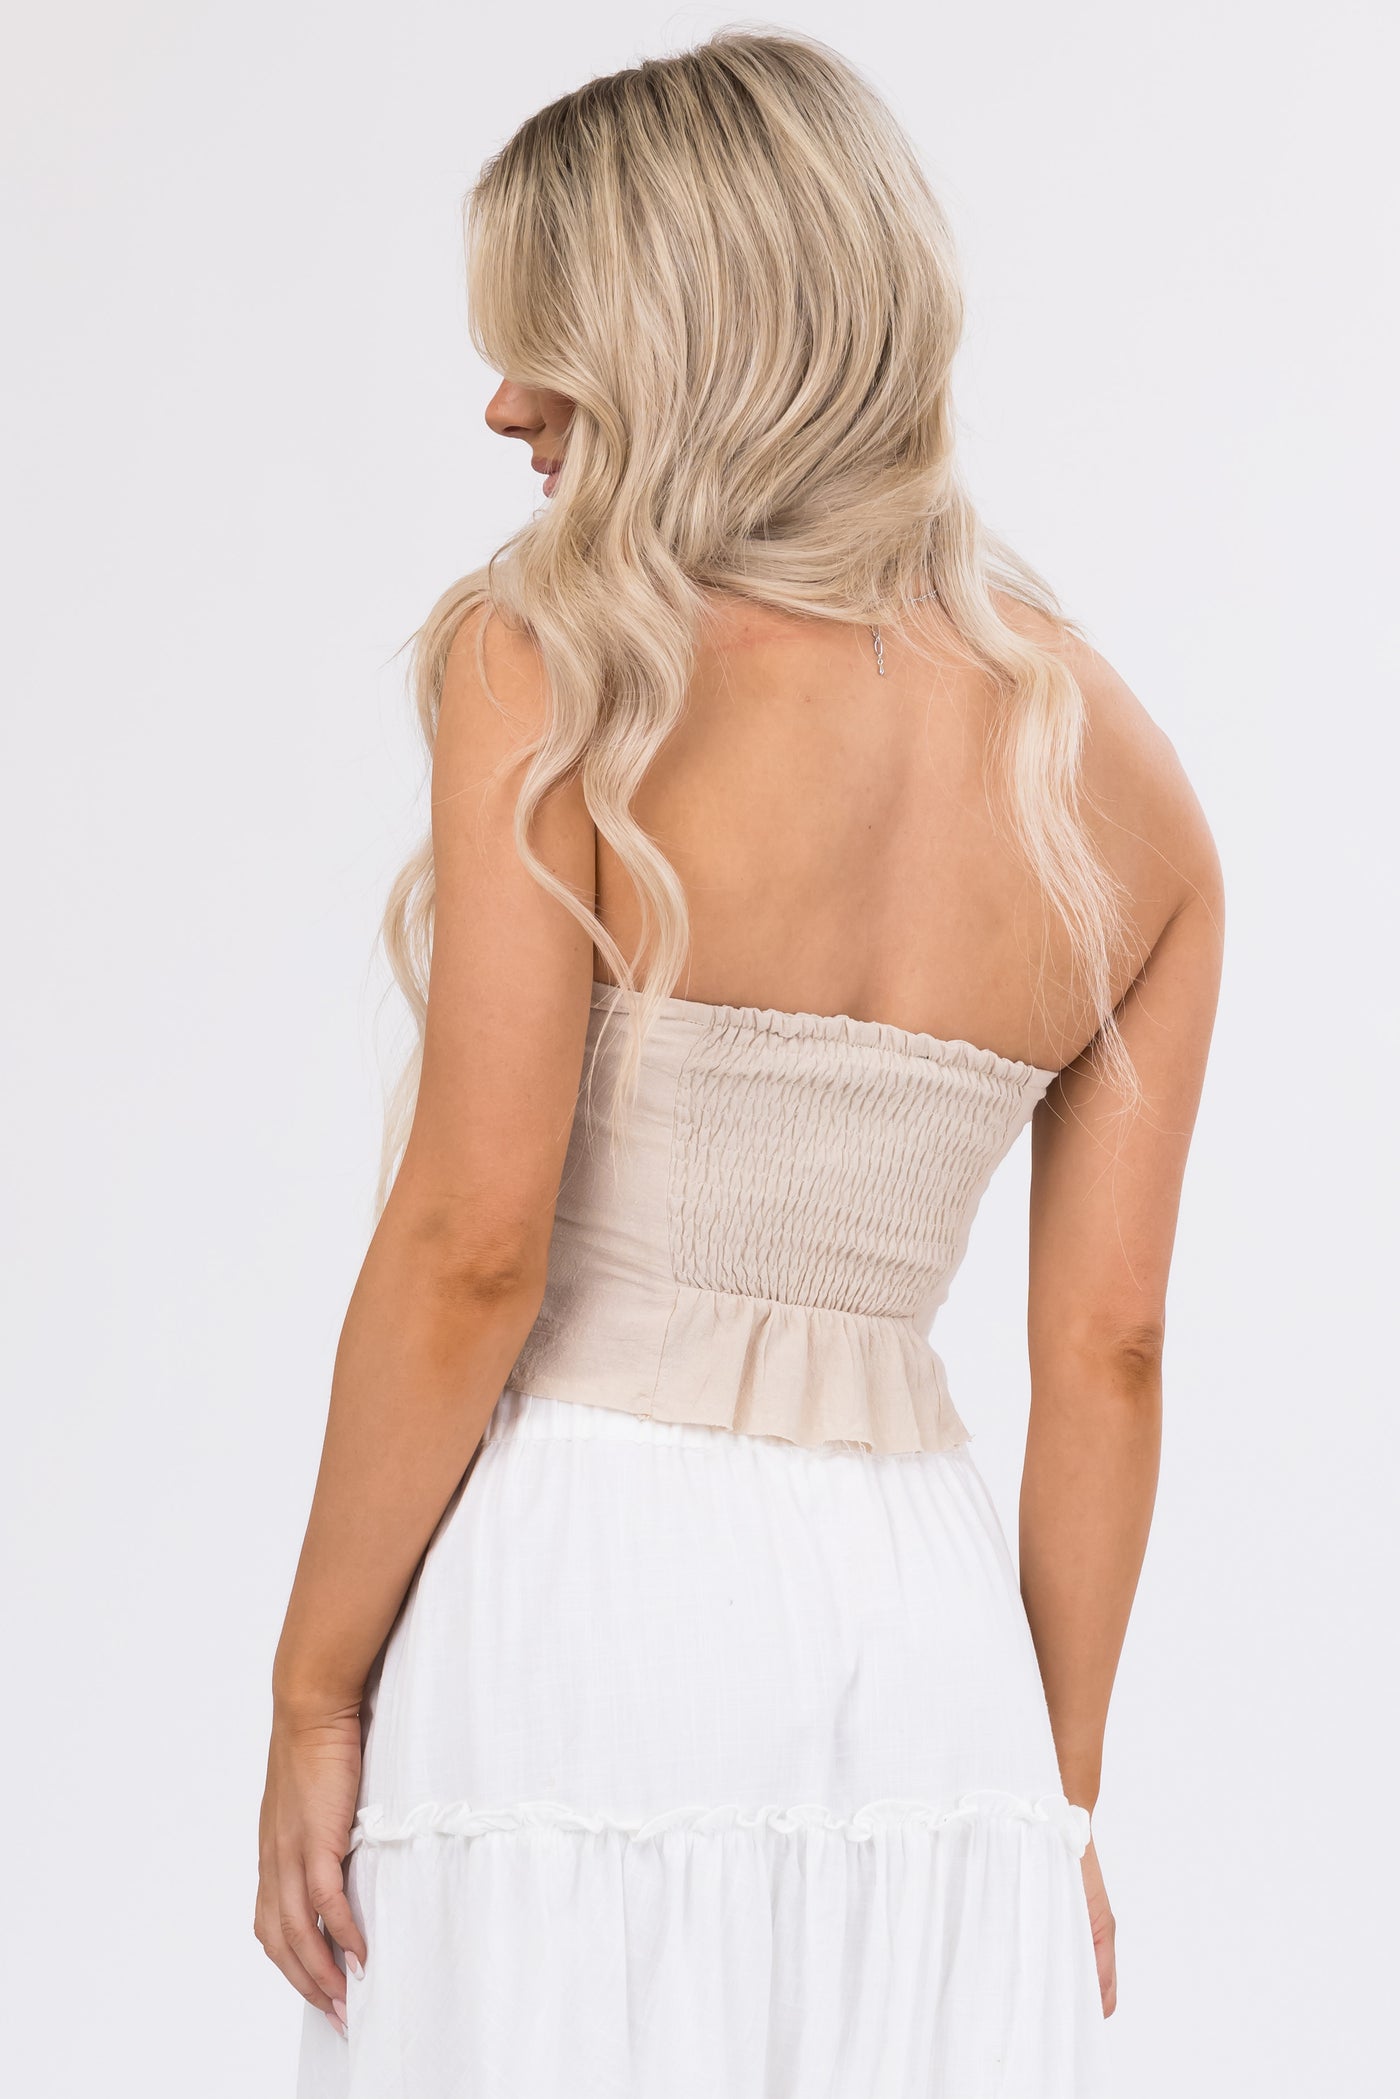 Oatmeal Hook and Eye Closure Strapless Corset Top